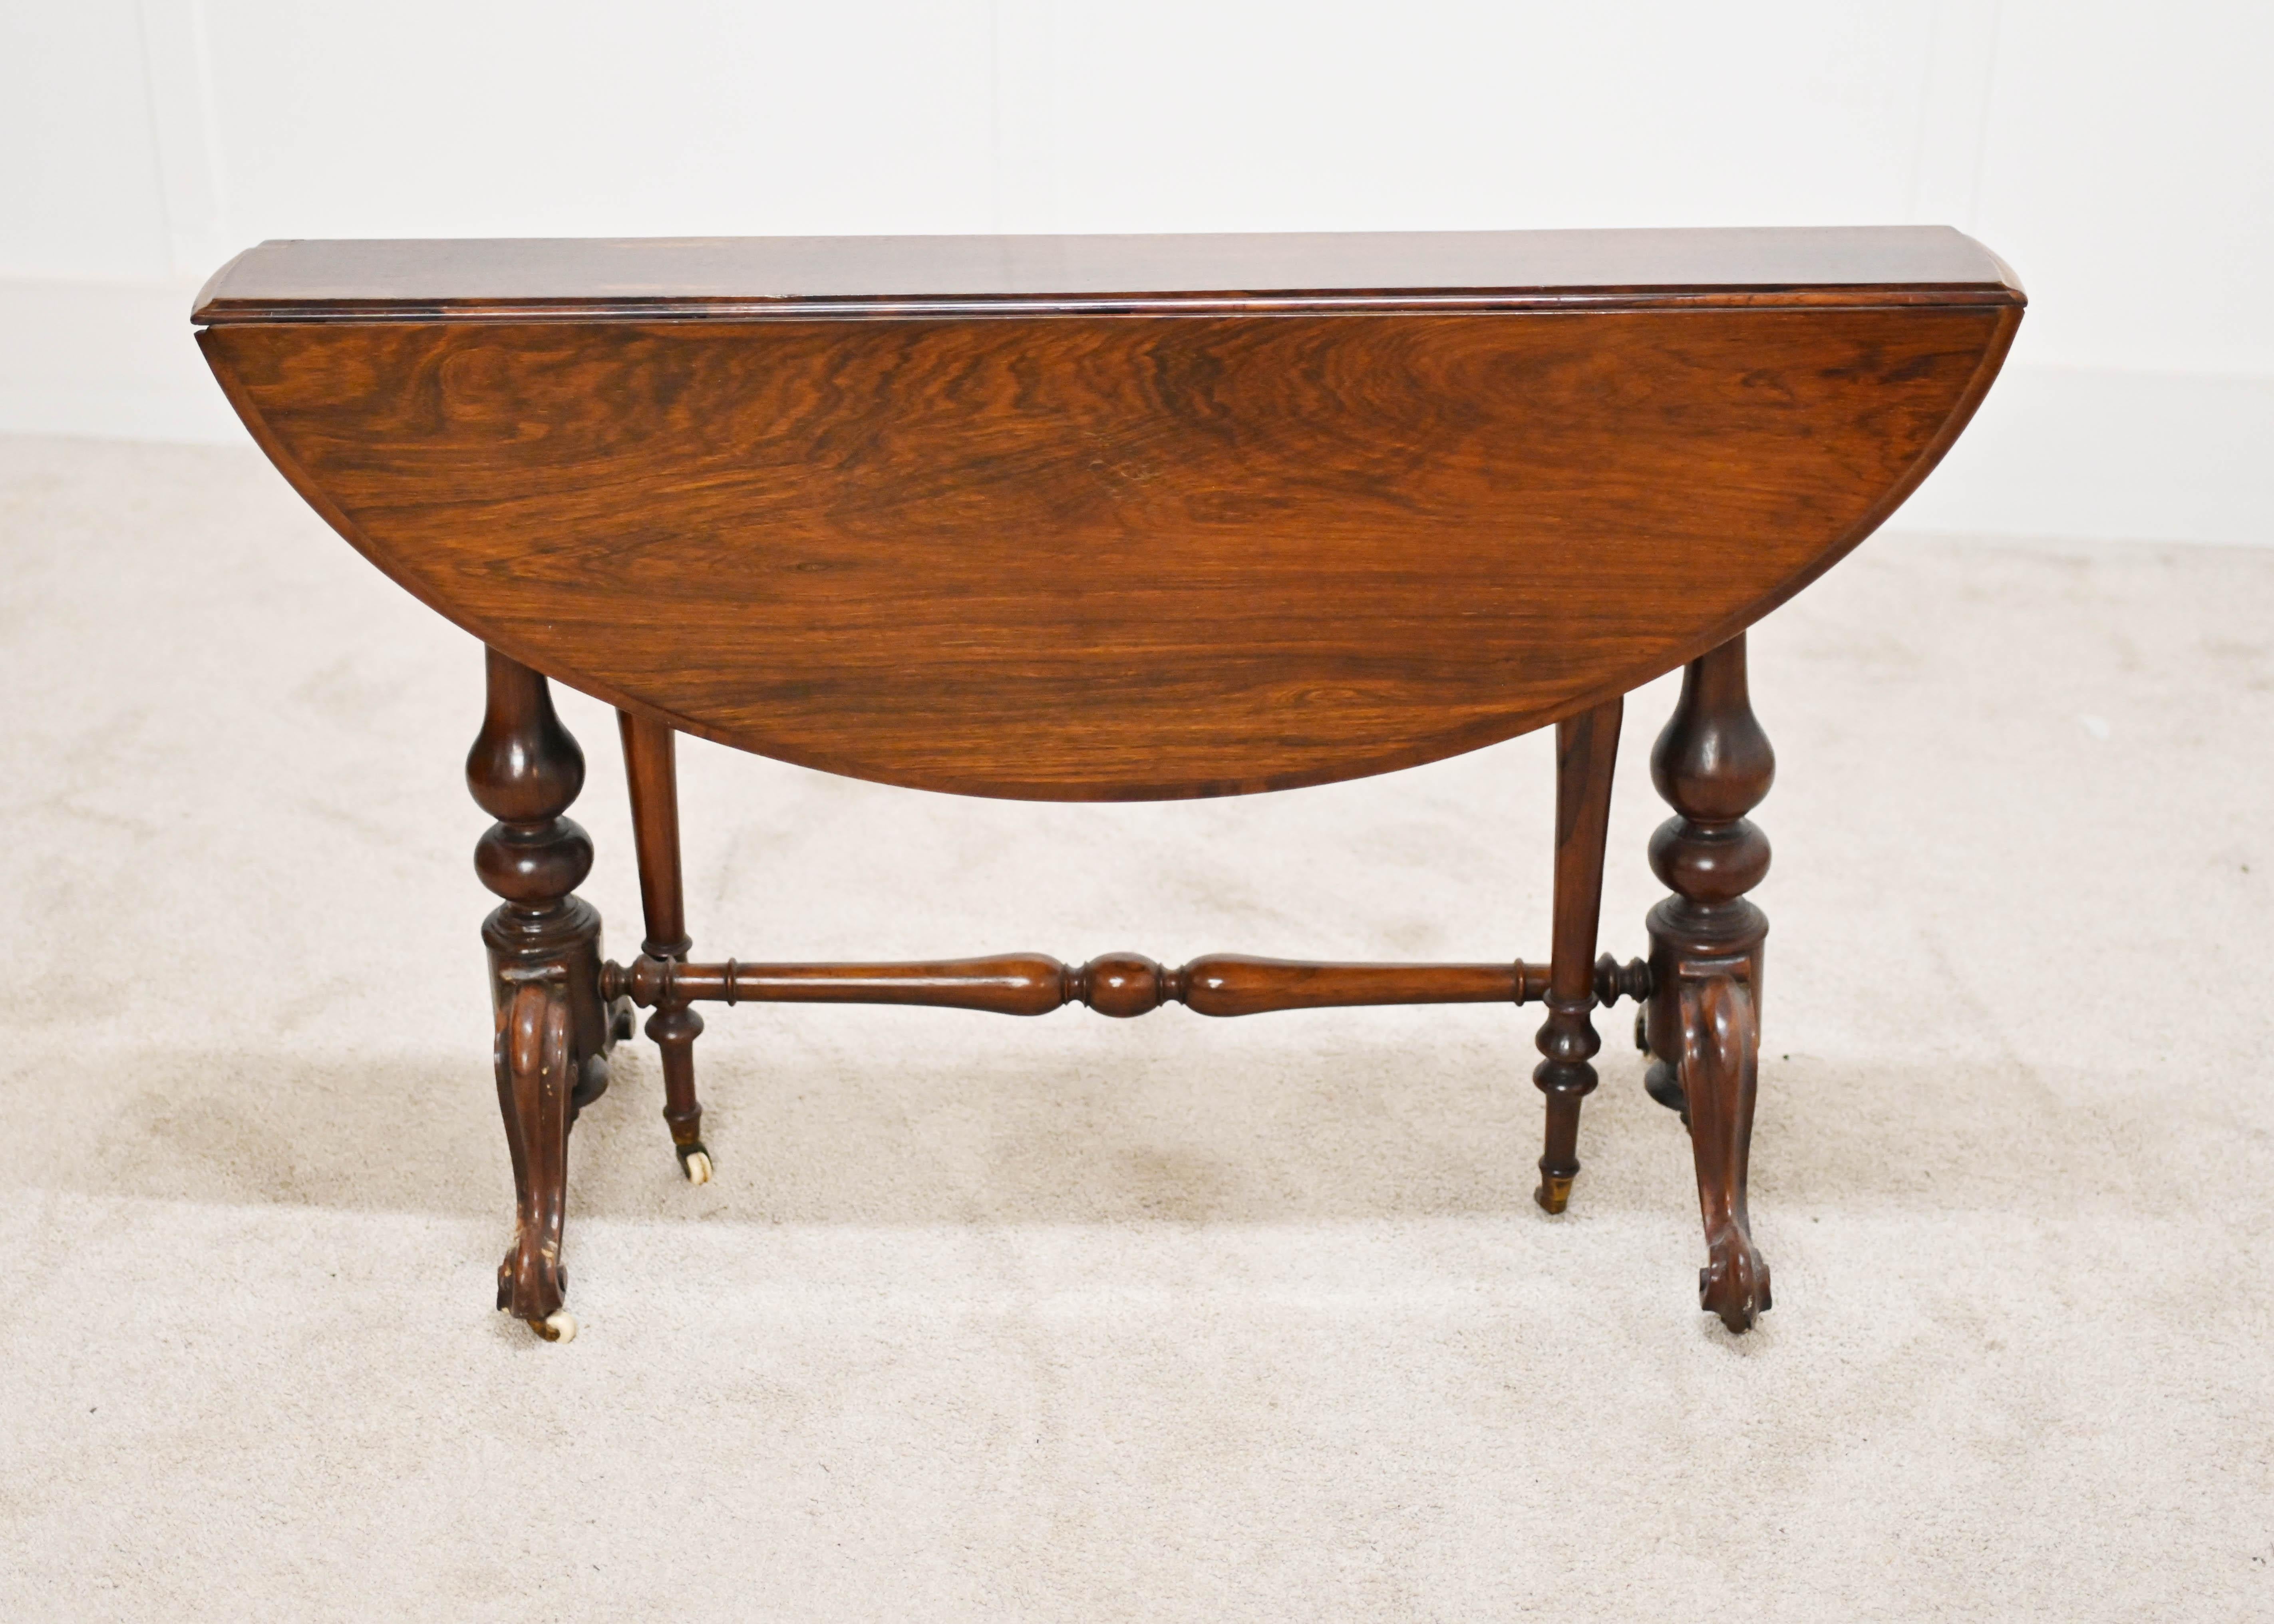 A gorgeous Sutherland table with a drop leaf stretchers base with 4 carved legs
Circa 1880
Hand crafted from mahogany Sutherland Tables are a 19th Century Victorian invention of a much smaller gateleg table design 
The design was first created in